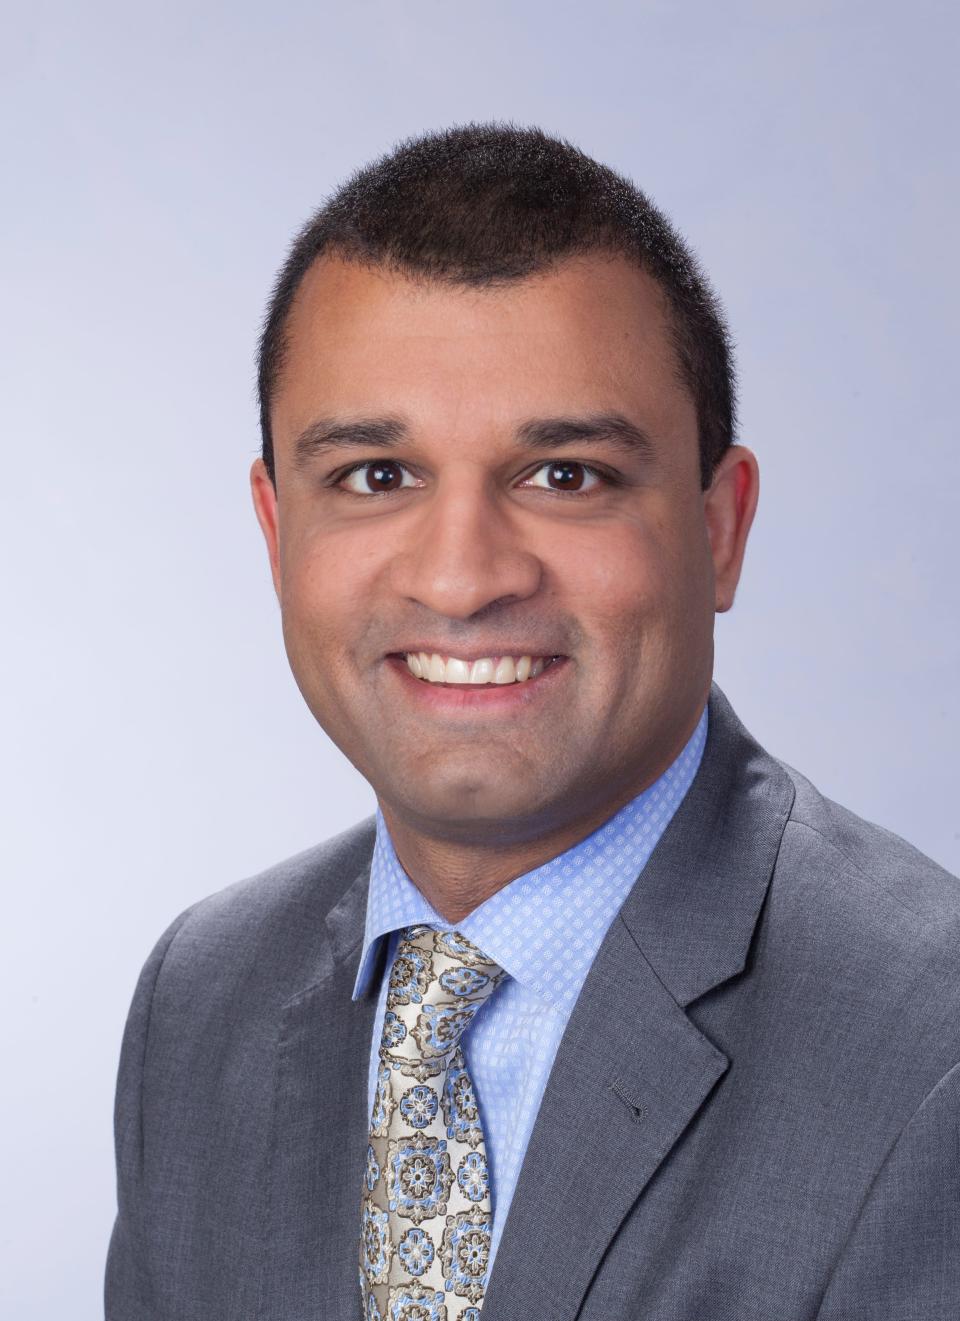 Dr. S. Shahzad Mustafa is the head of allergy, immunology and rheumatology at Rochester Regional Health.